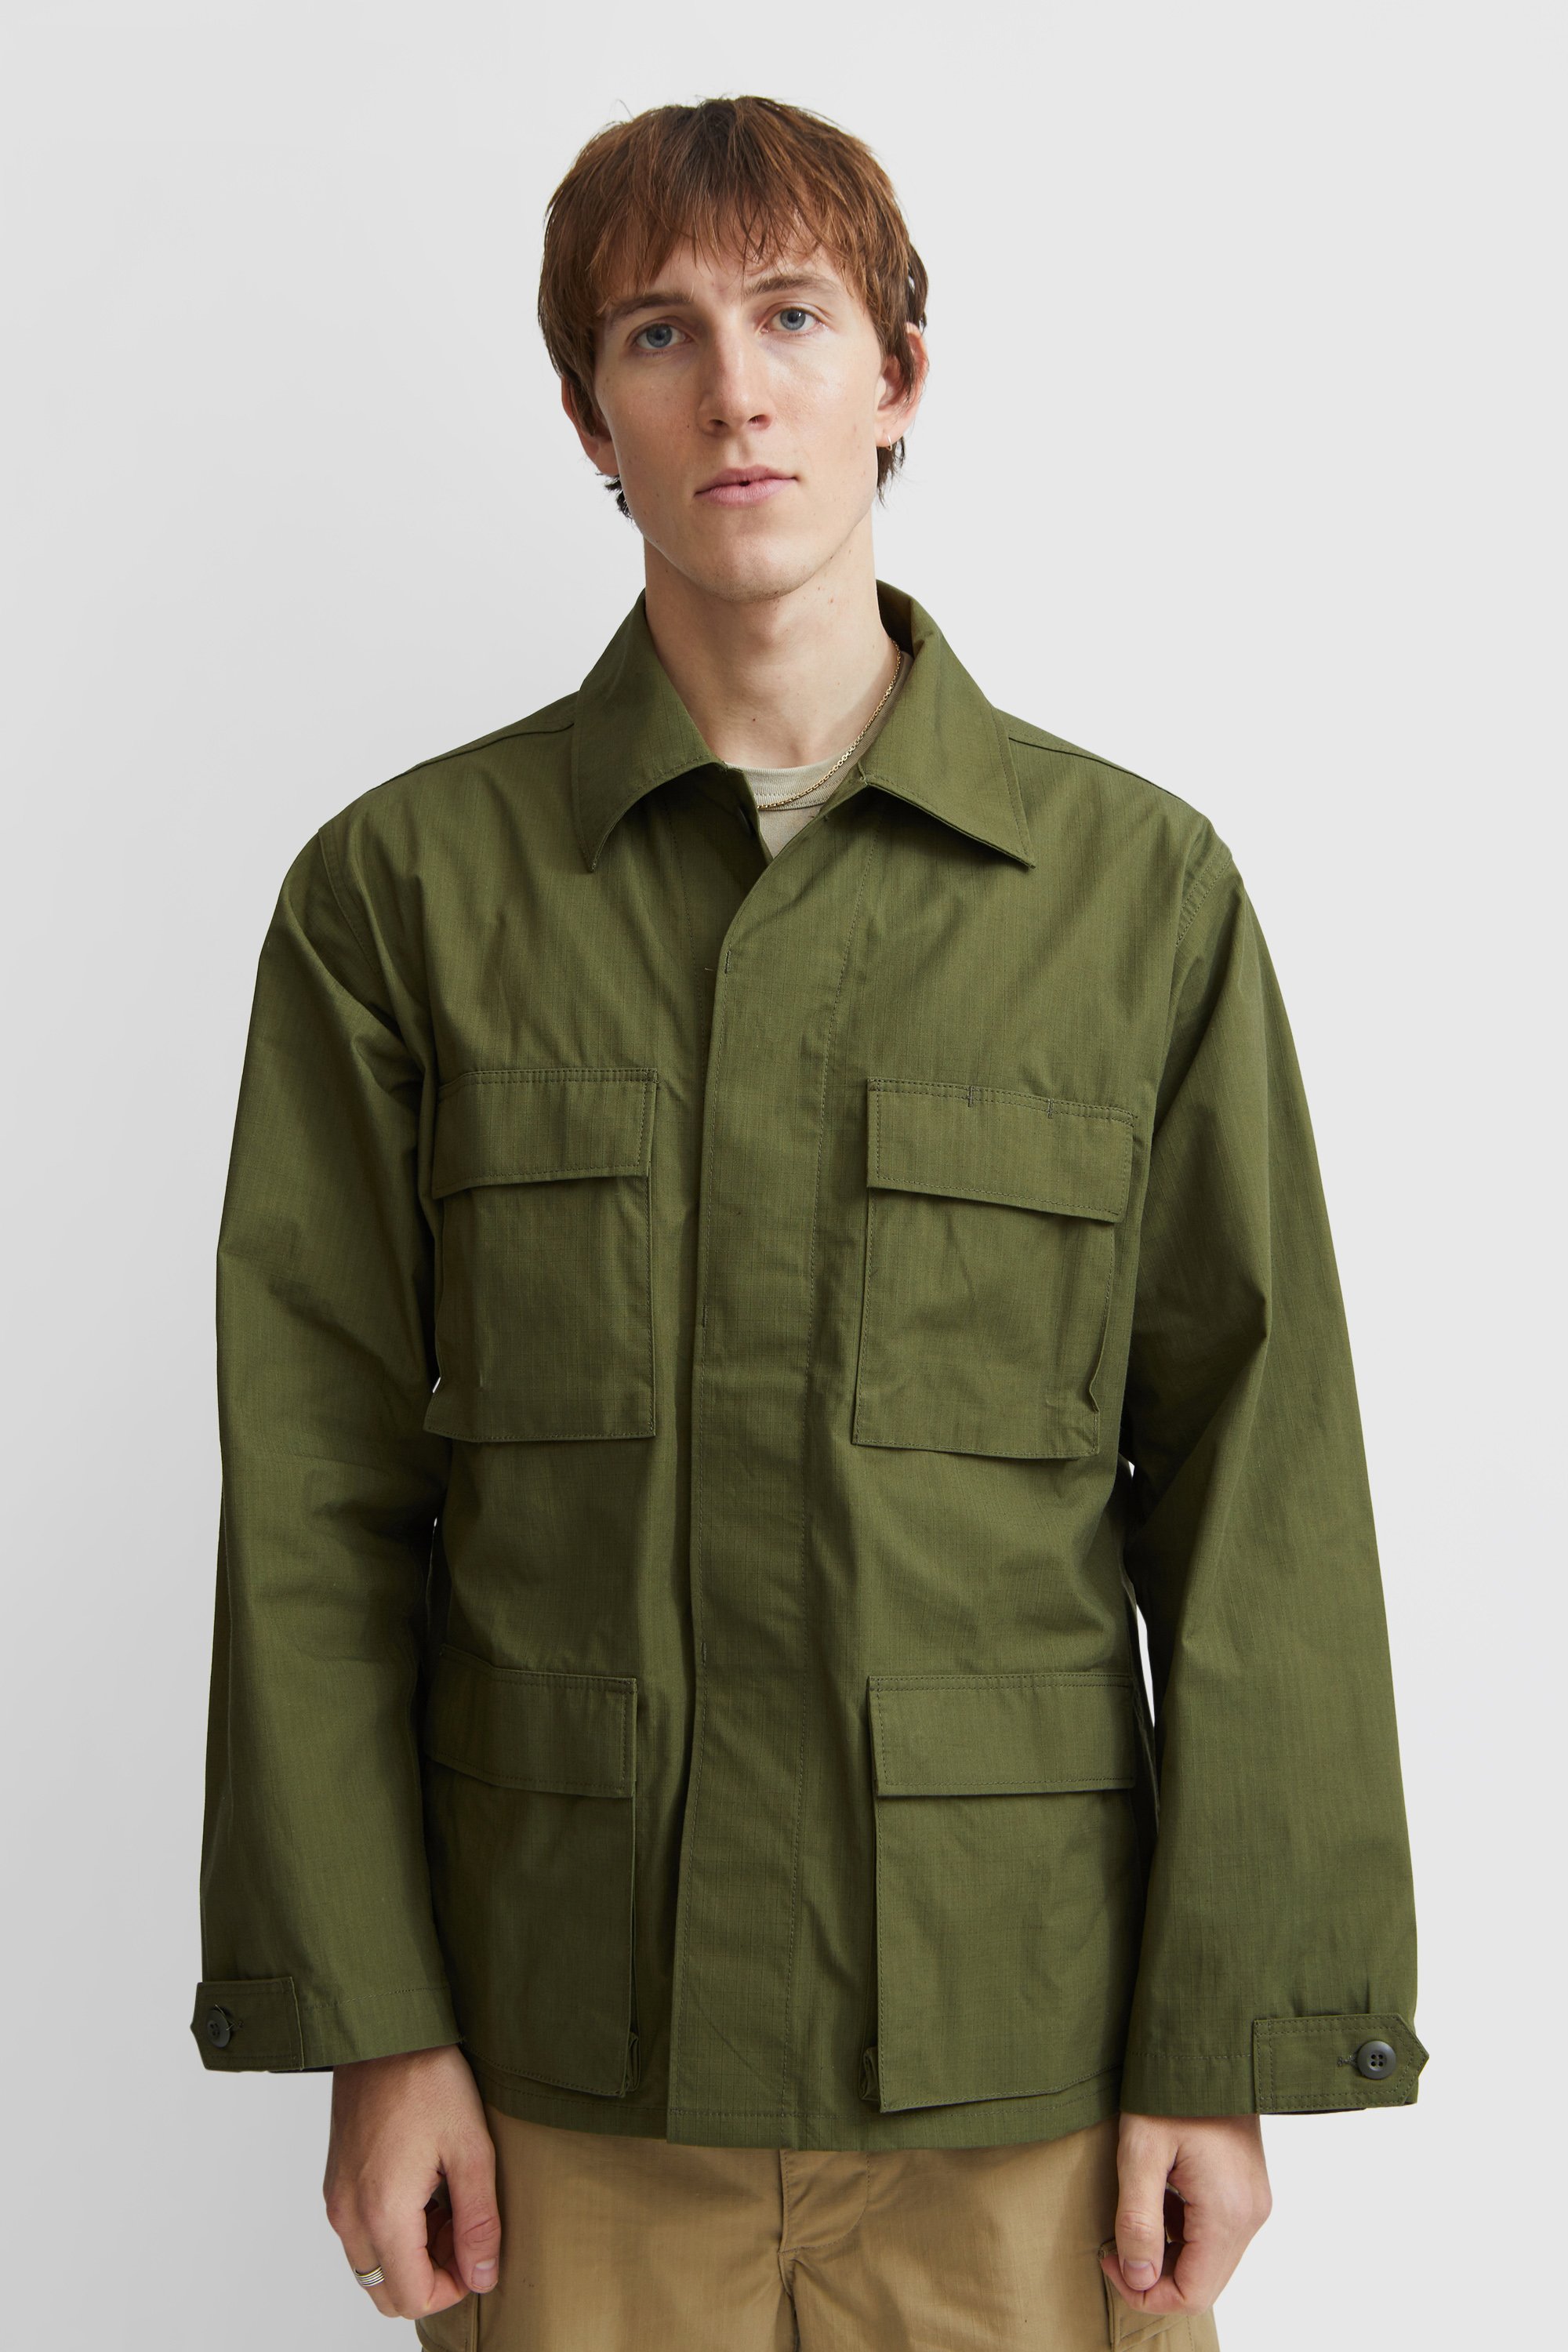 WTAPS WMILL- 01 LS Nyco. Ripstop Olive drab